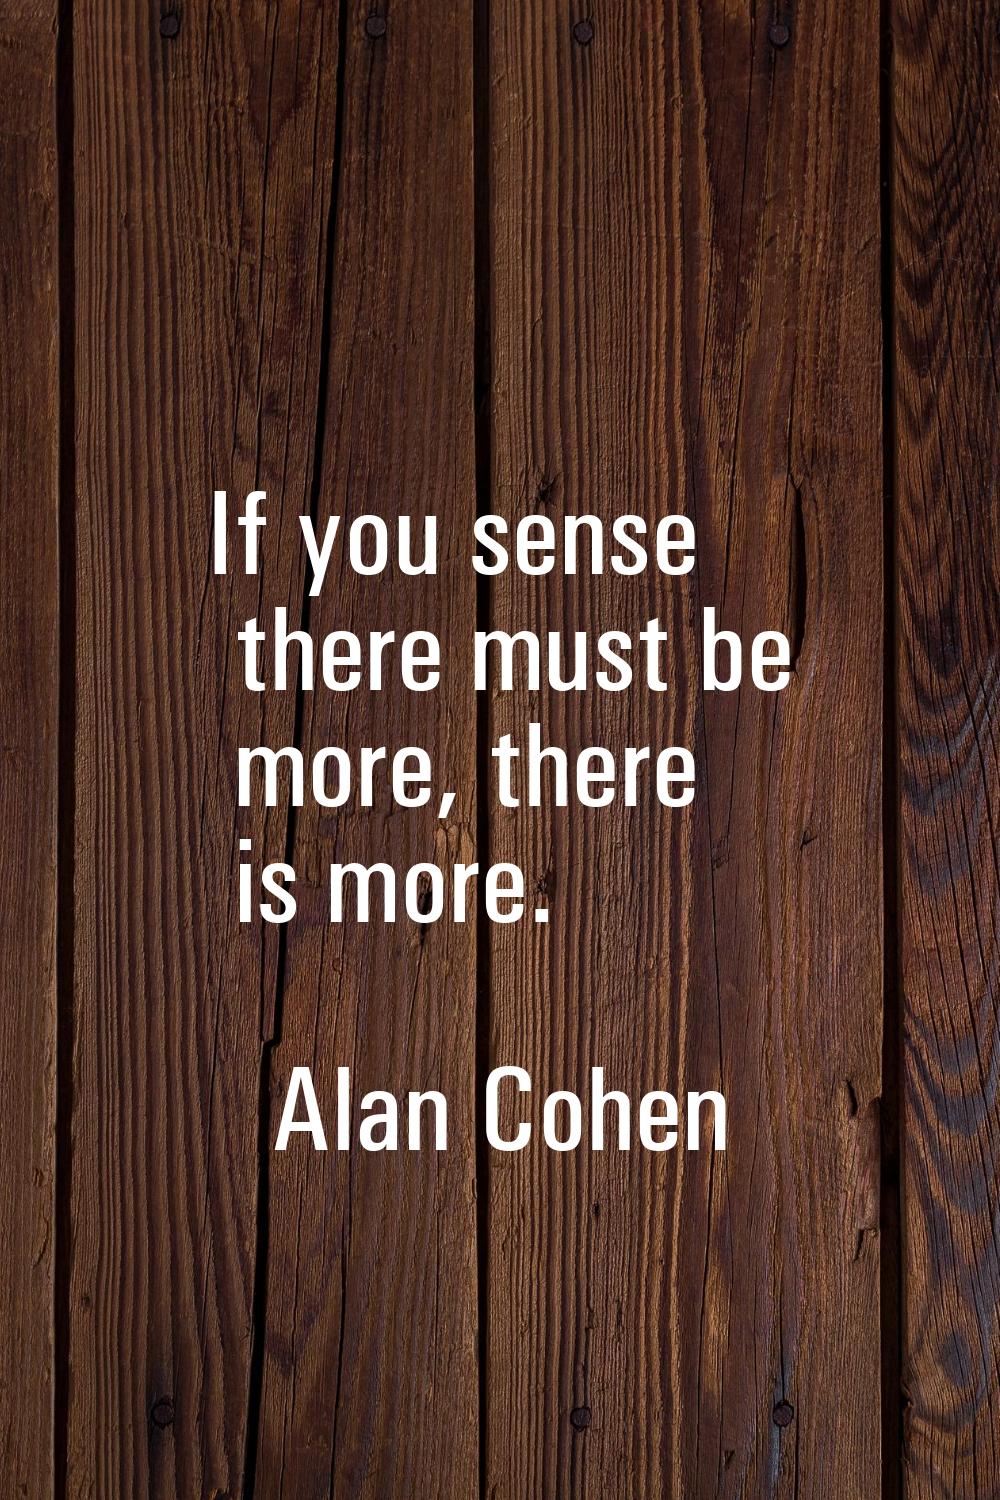 If you sense there must be more, there is more.